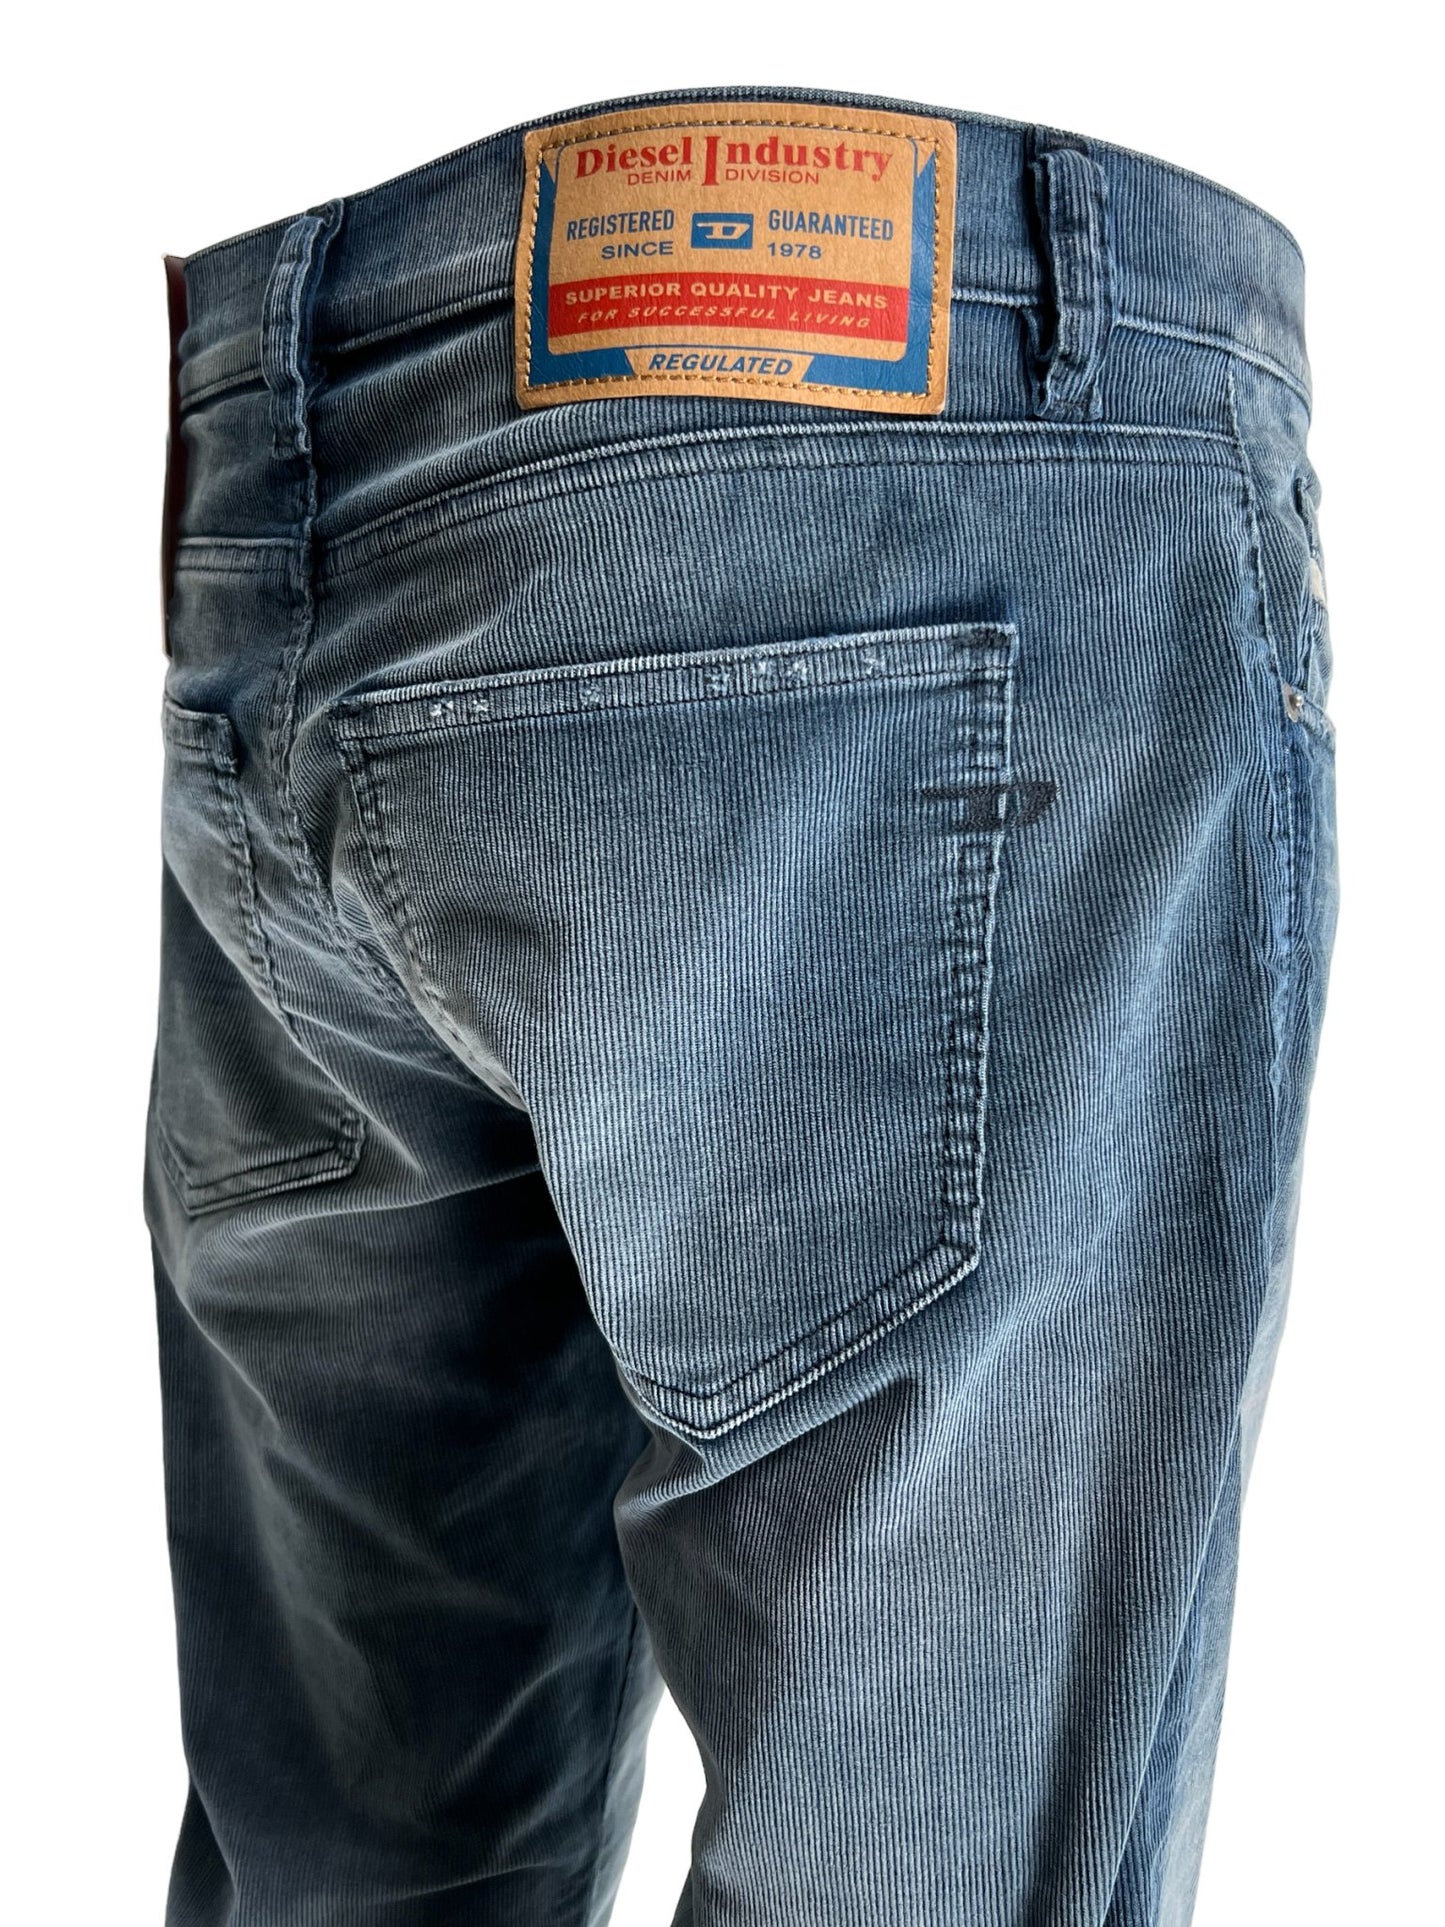 A person standing sideways wearing blue DIESEL 2019 D-STRUKT 68JF comfort denim jeans with a visible back pocket and brand patch.